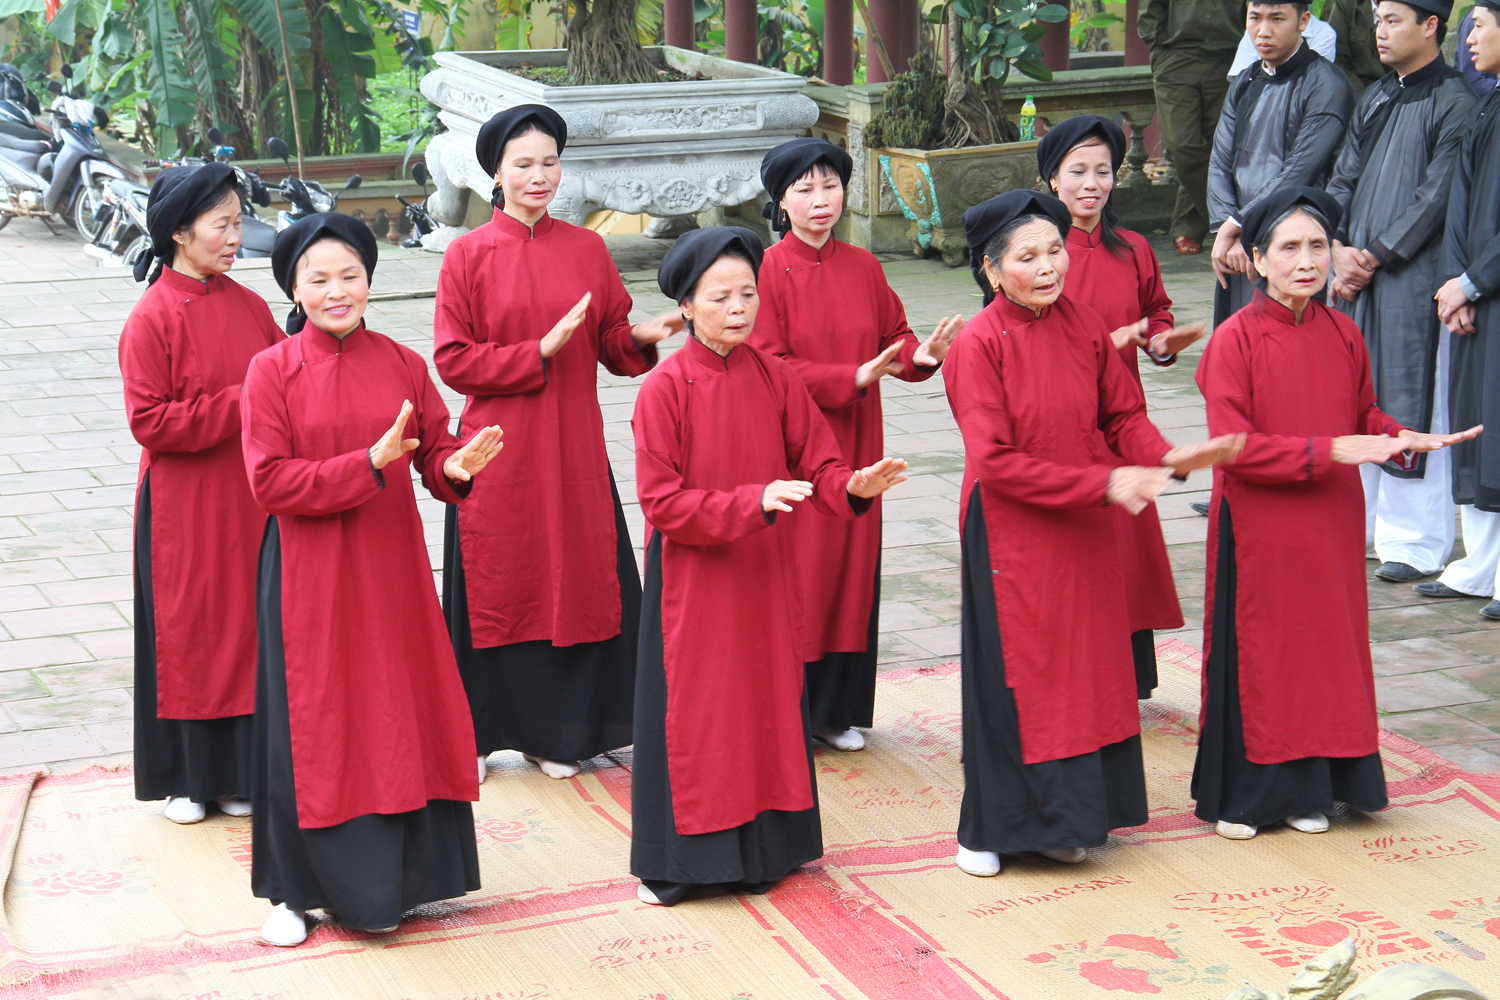 Xoan singing to become intangible cultural heritage of humanity